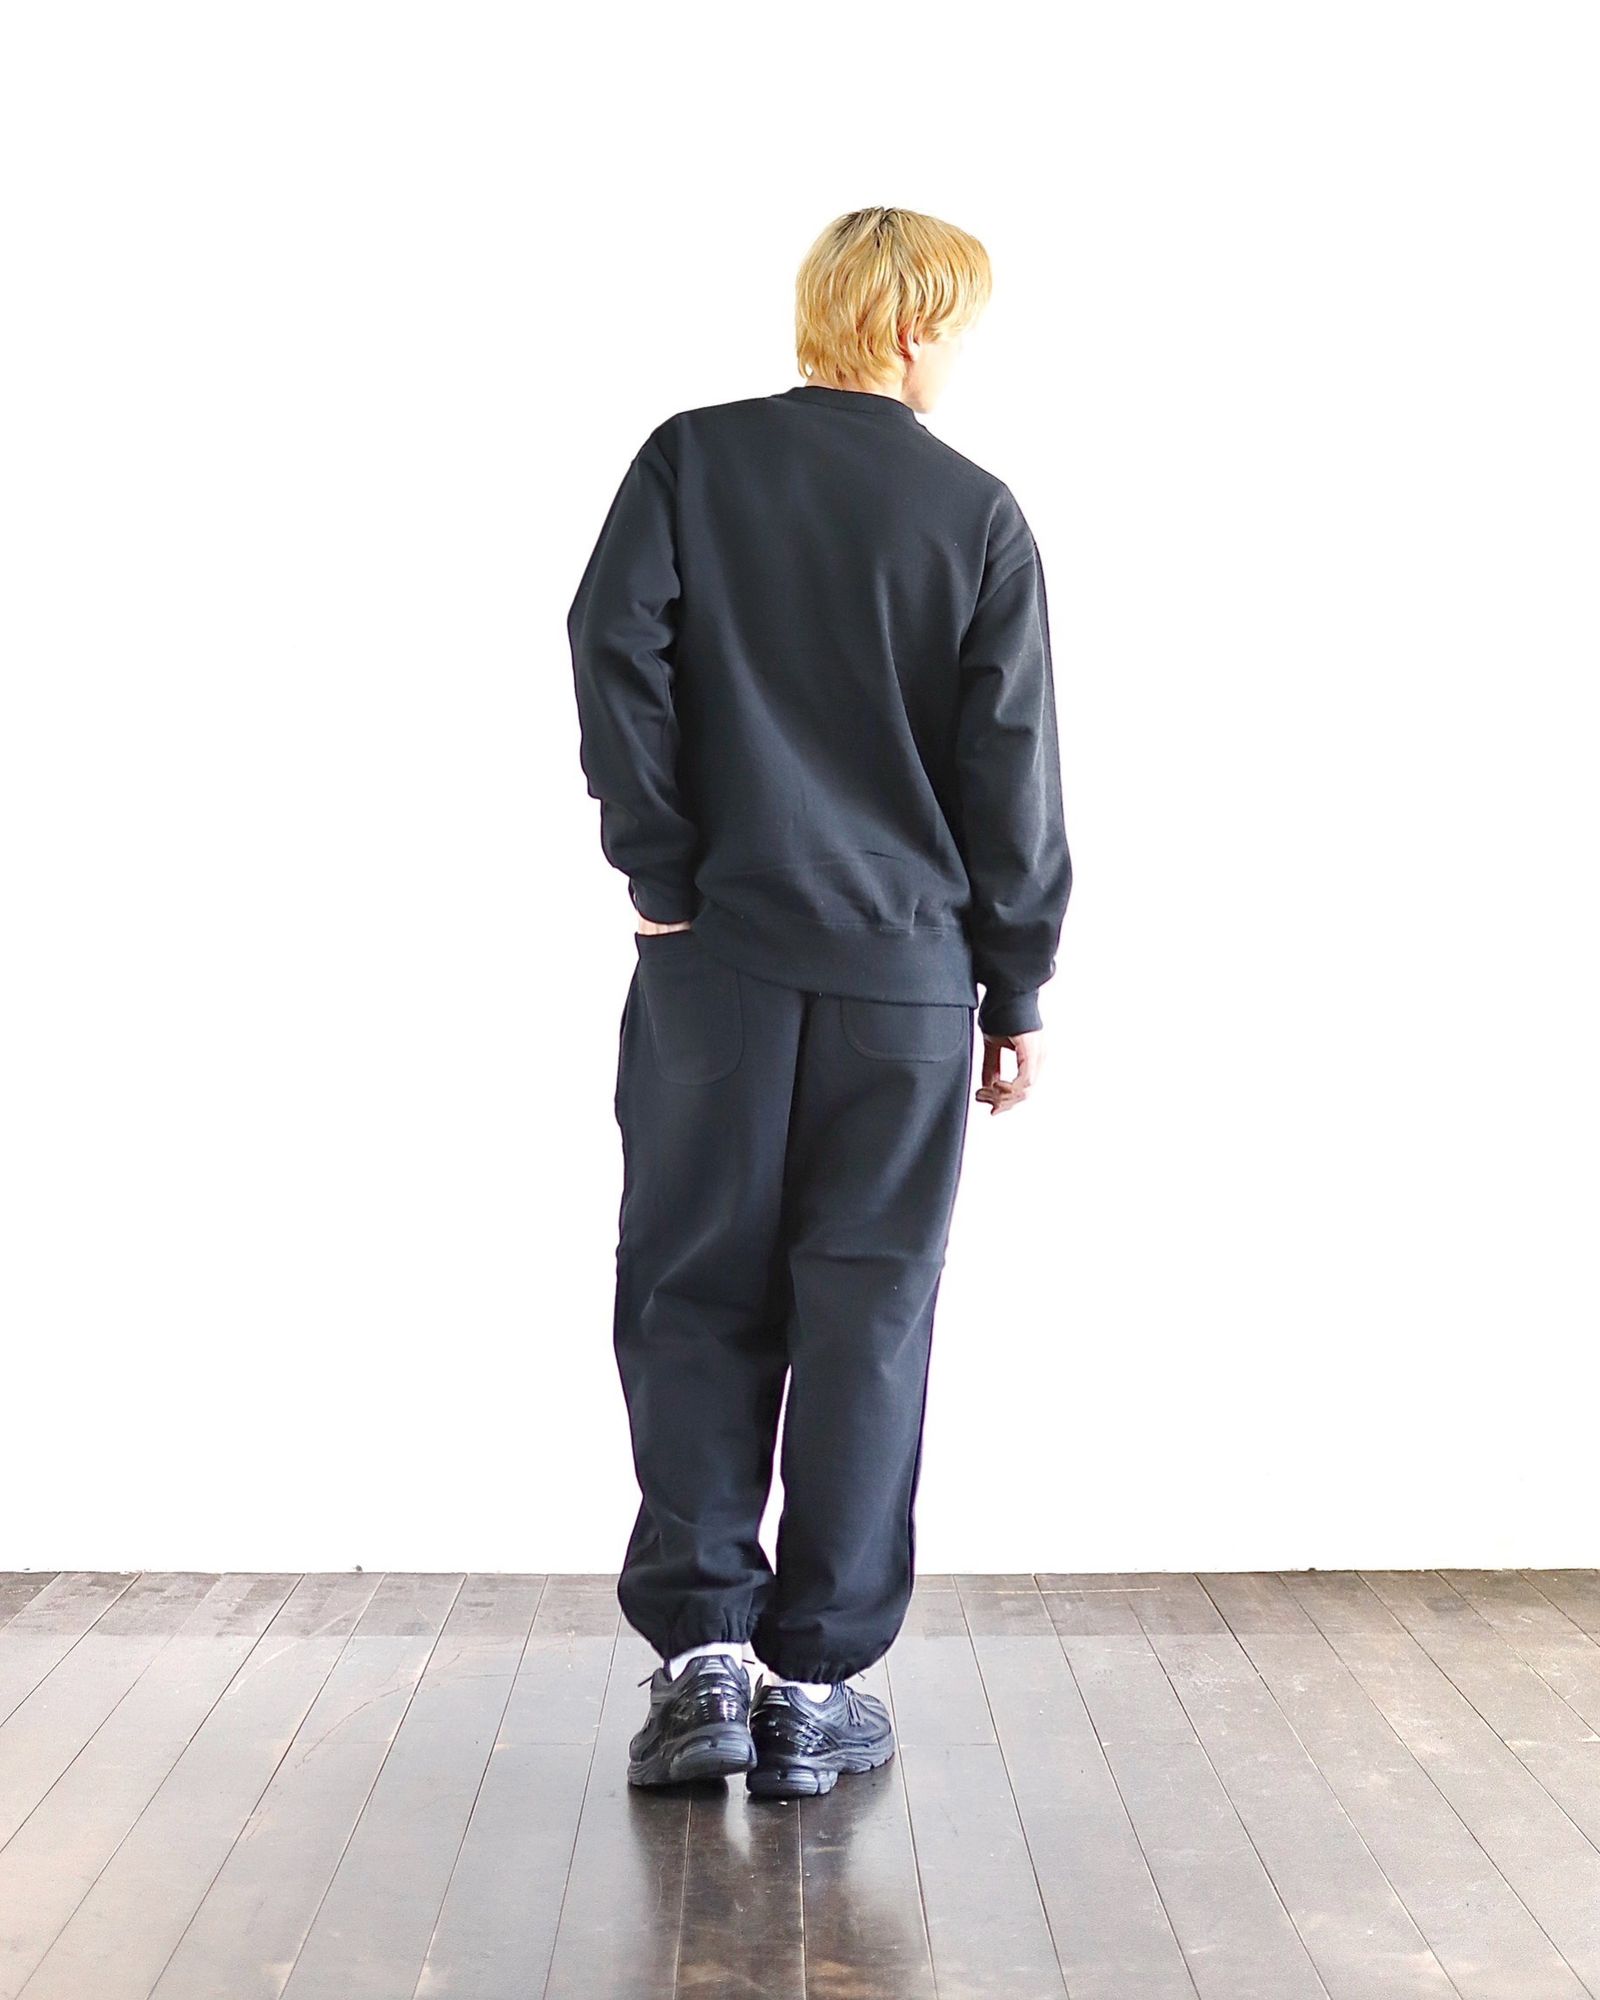 COMME des GARCONS HOMME 24SS HOMMEプリントスウェット スタイル 